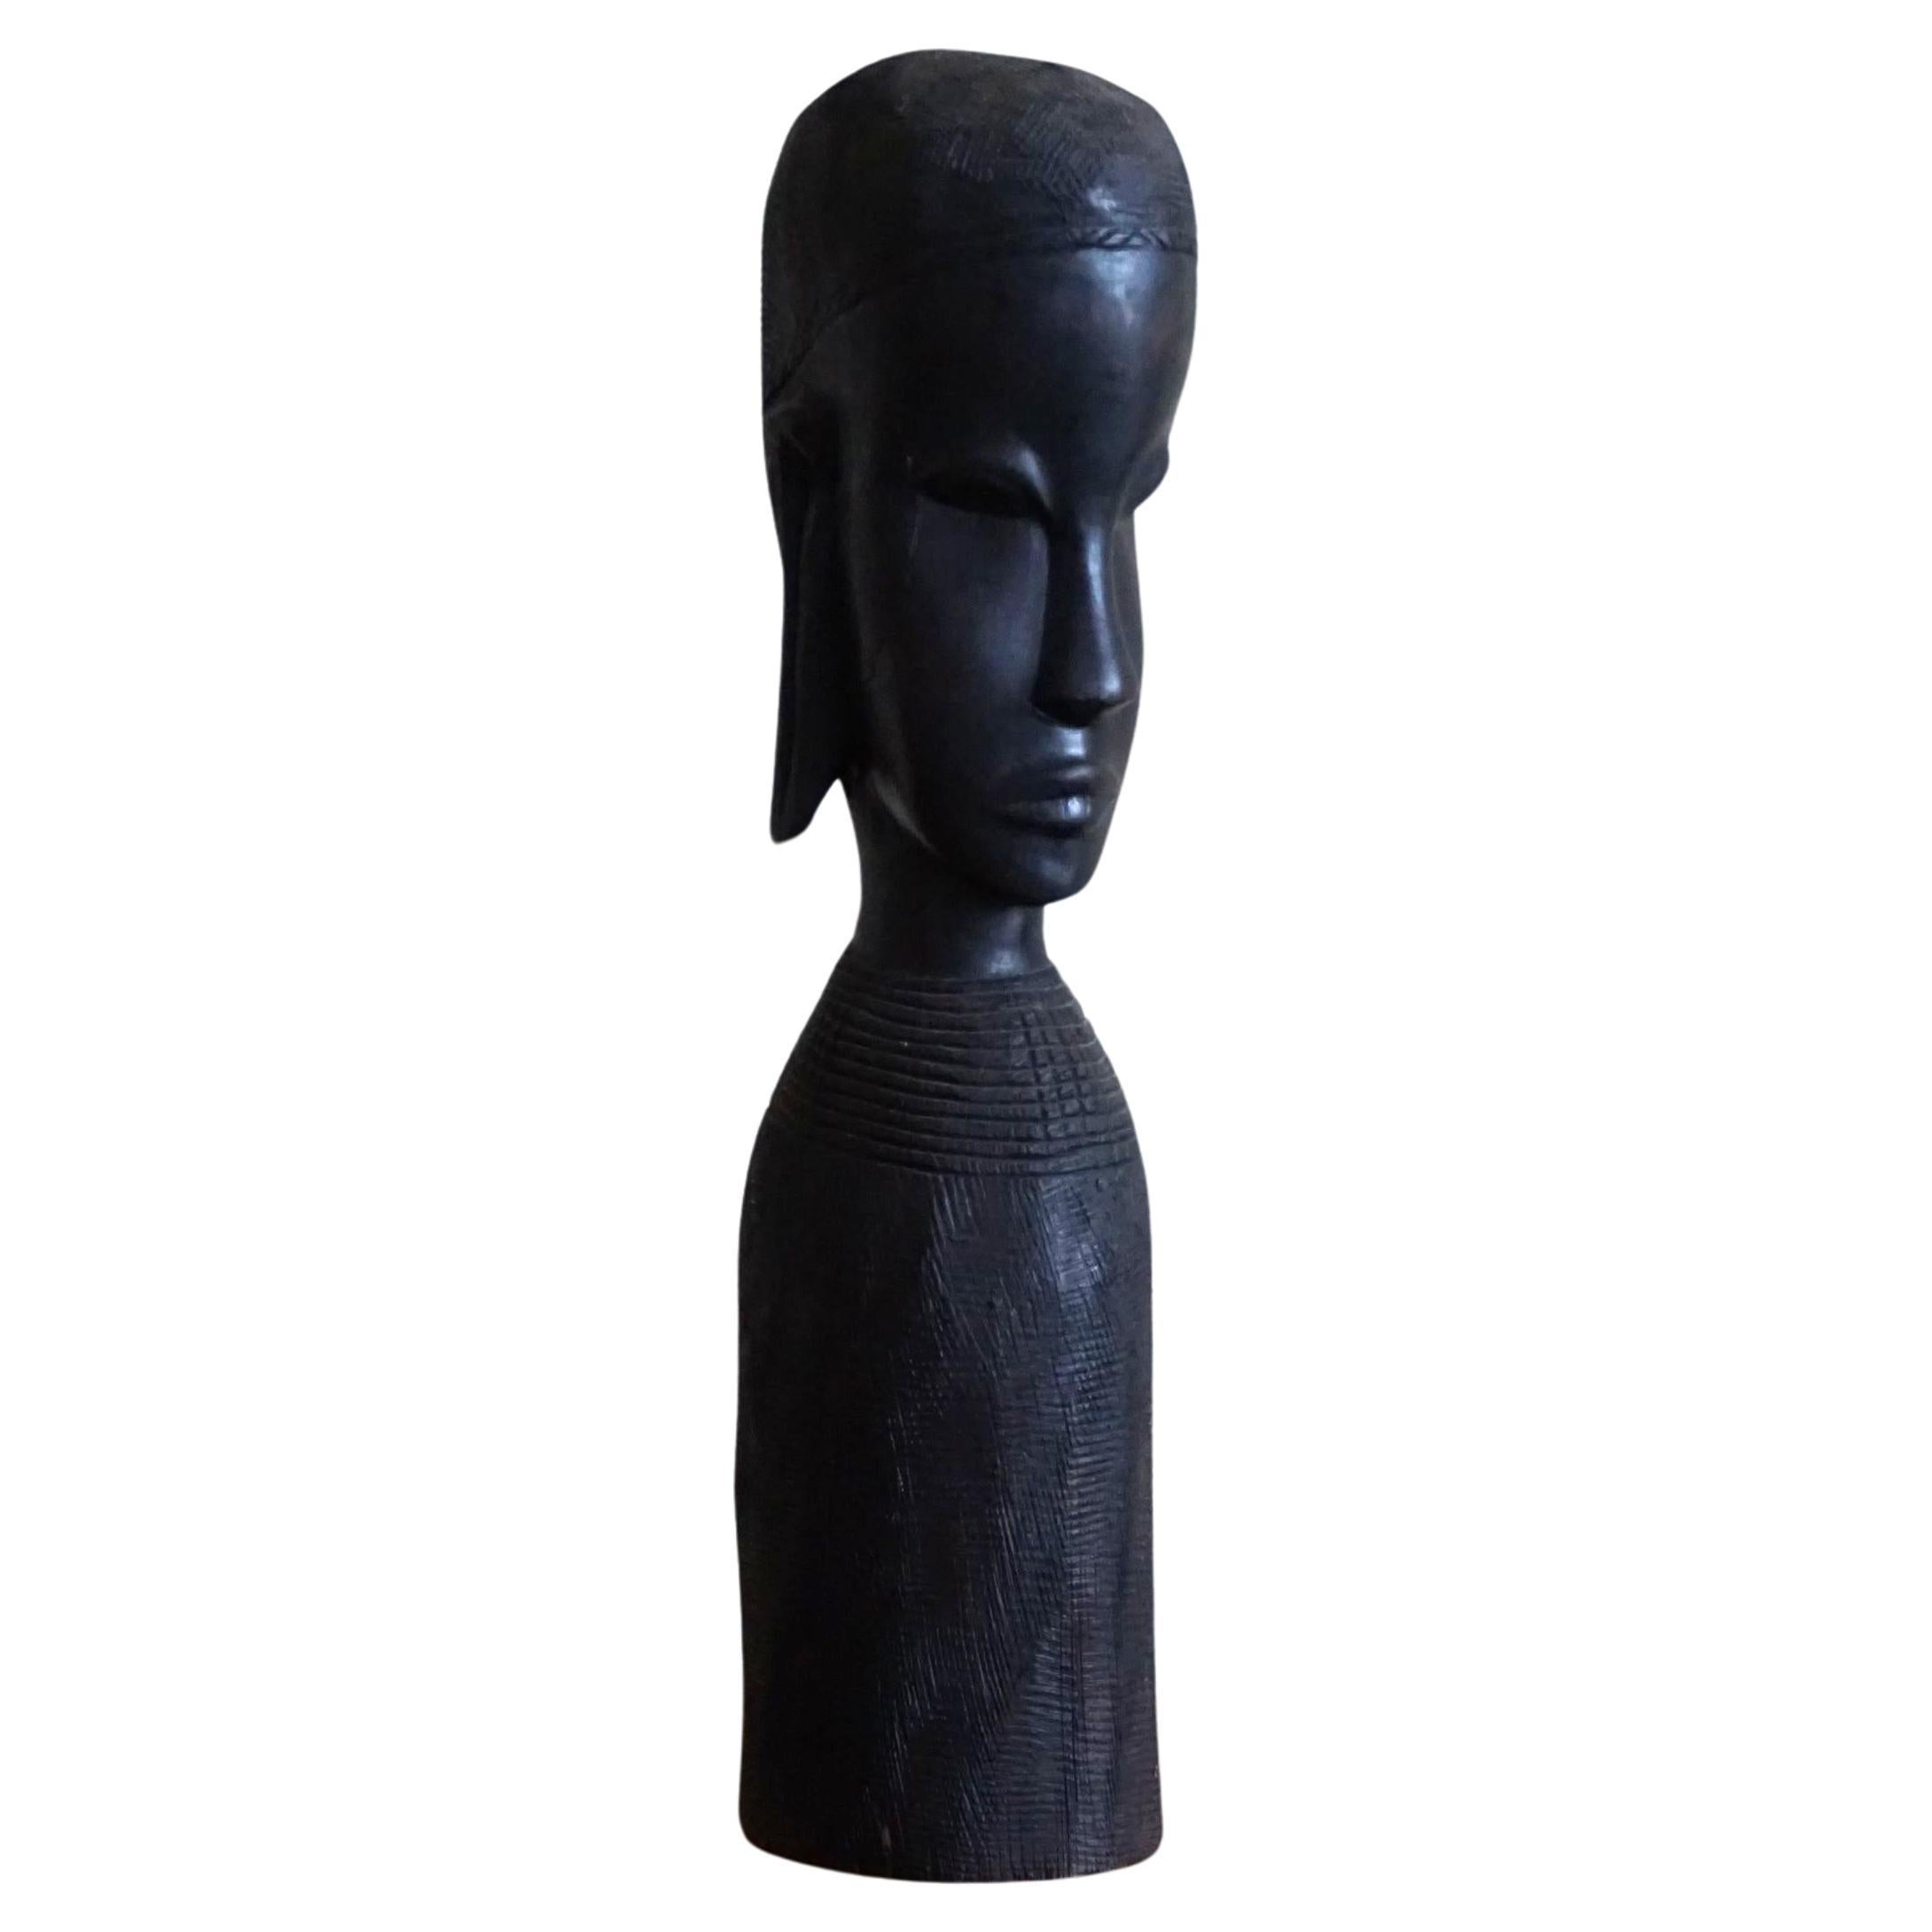 Decorative African Wooden Sculpture,  Mid Century, Handcrafted in the 1940-50s